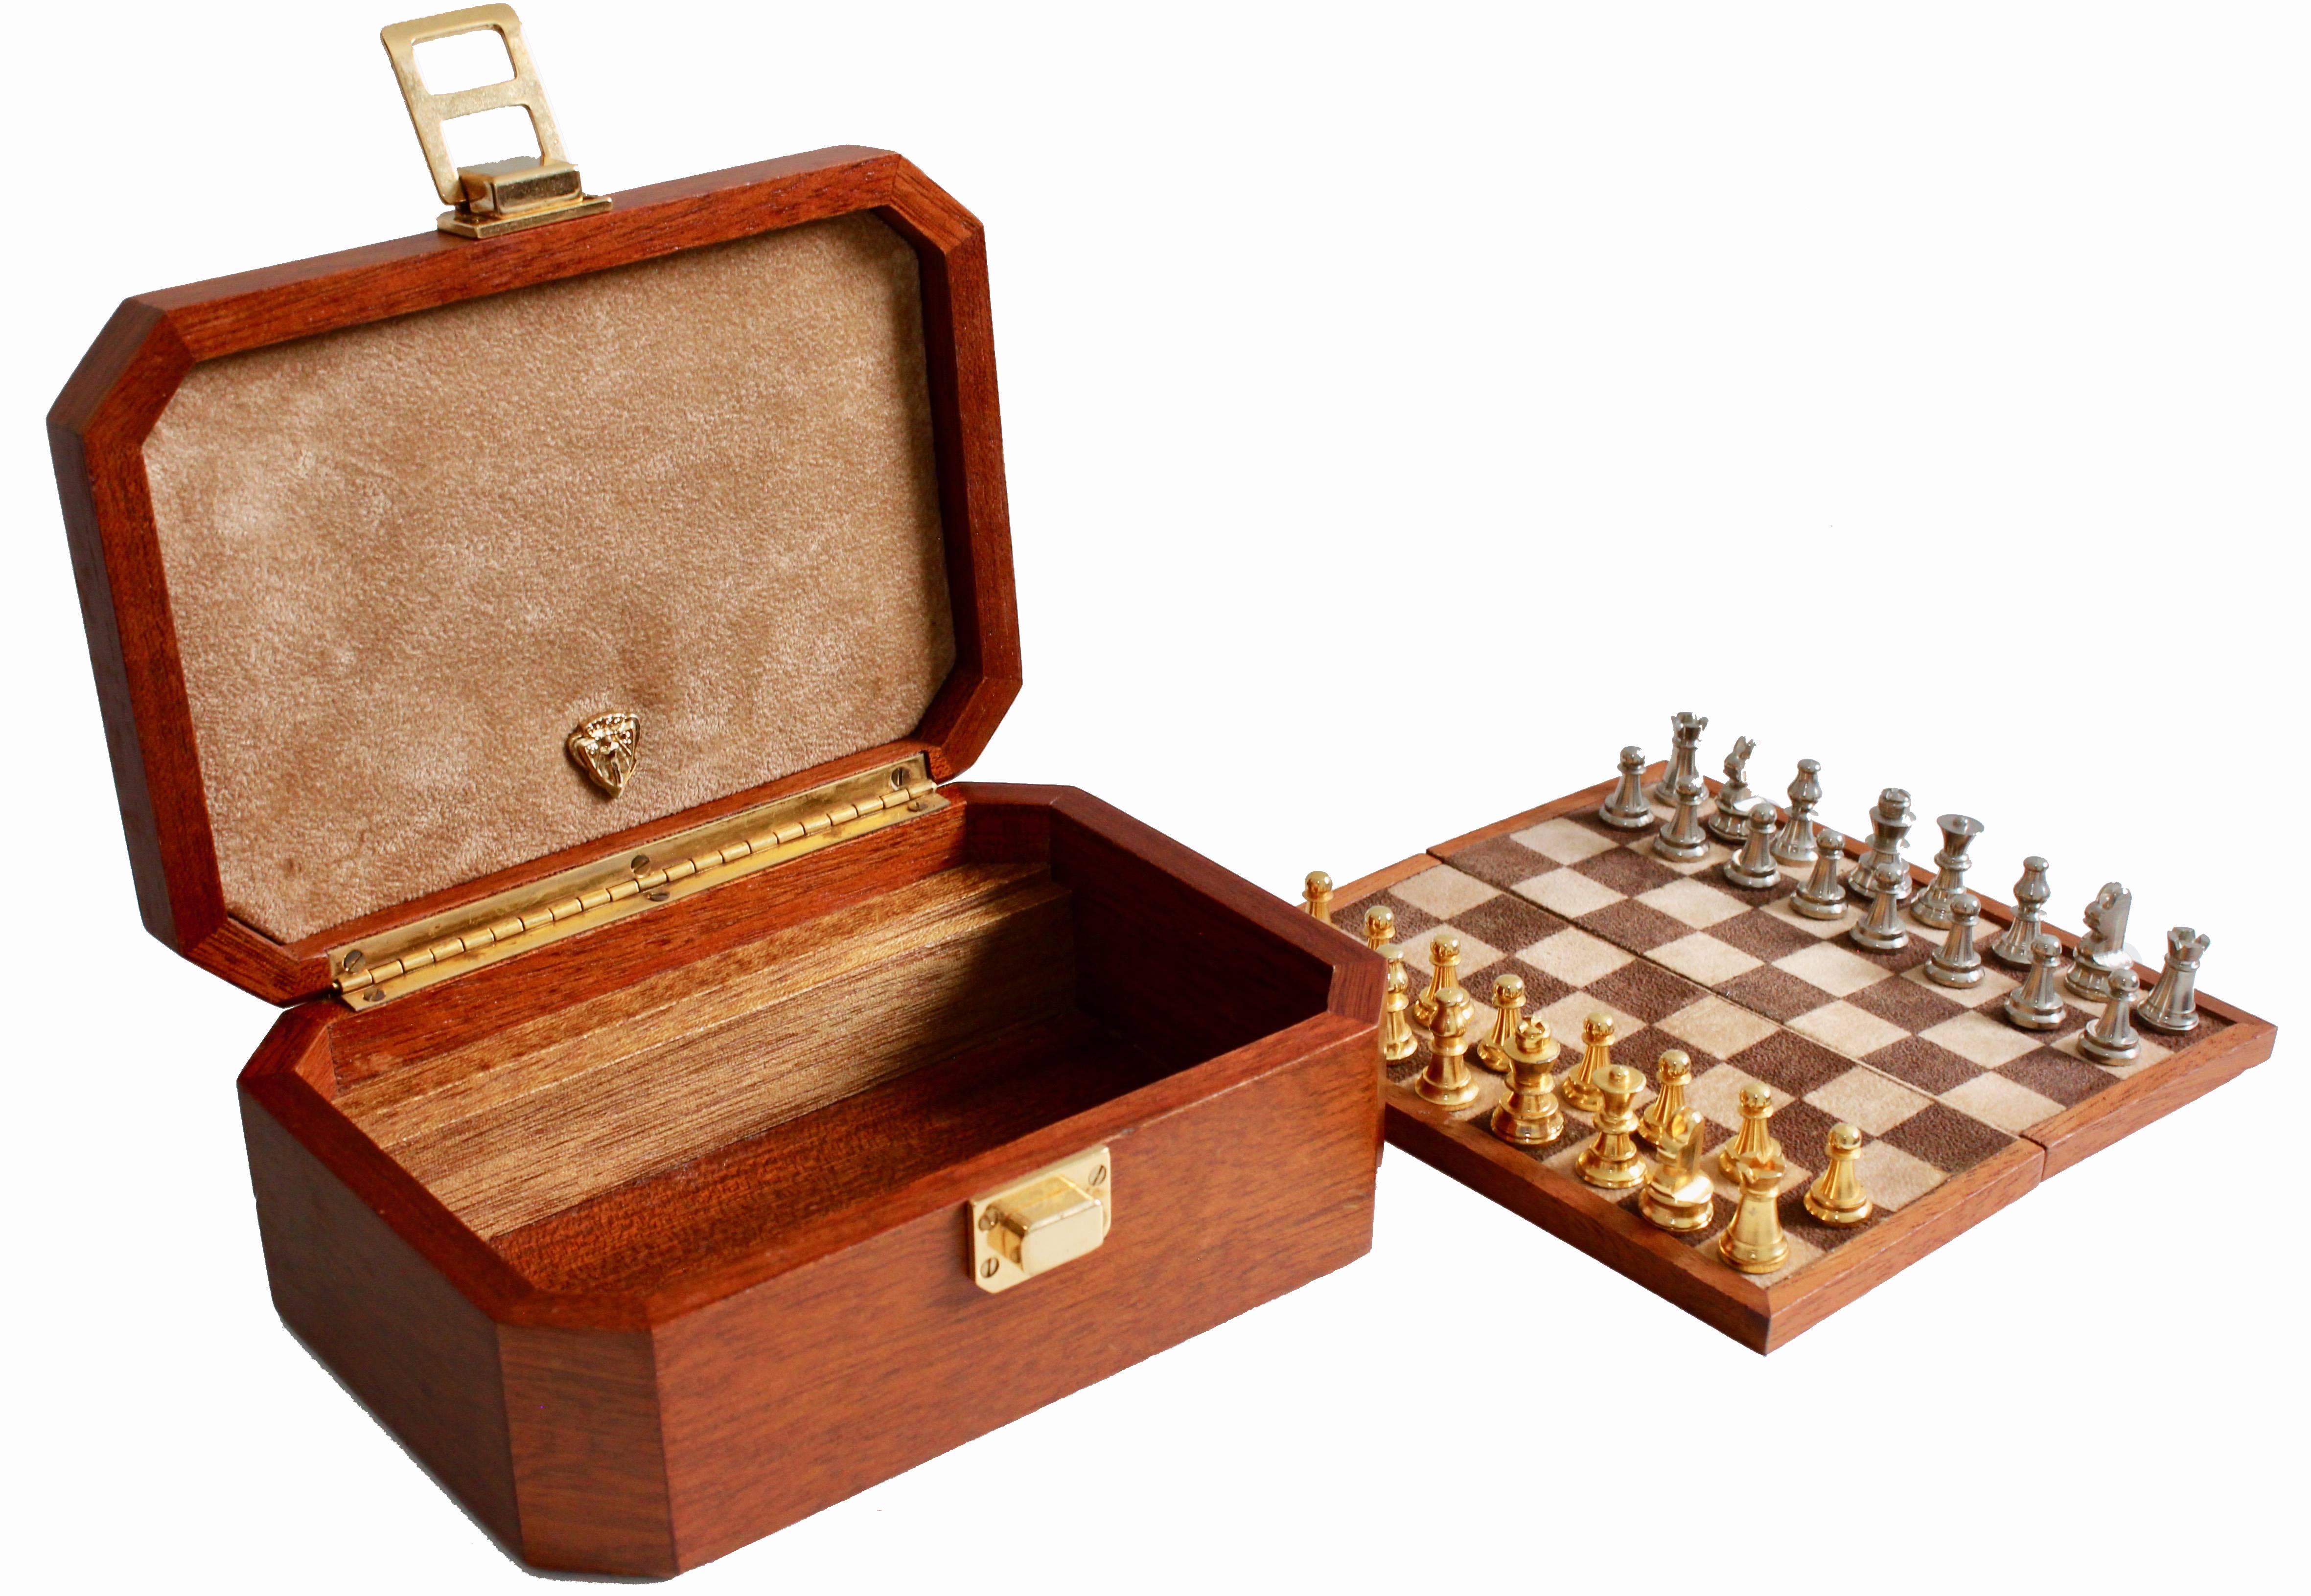 Here's a very rare burl wood box with chess set from Gucci, most likely made in the late 1970s.  Perfect for travel, as a show piece for your bar or as a gift, this fabulous set includes the Burl wood latched box with sueded bottom and top lining,